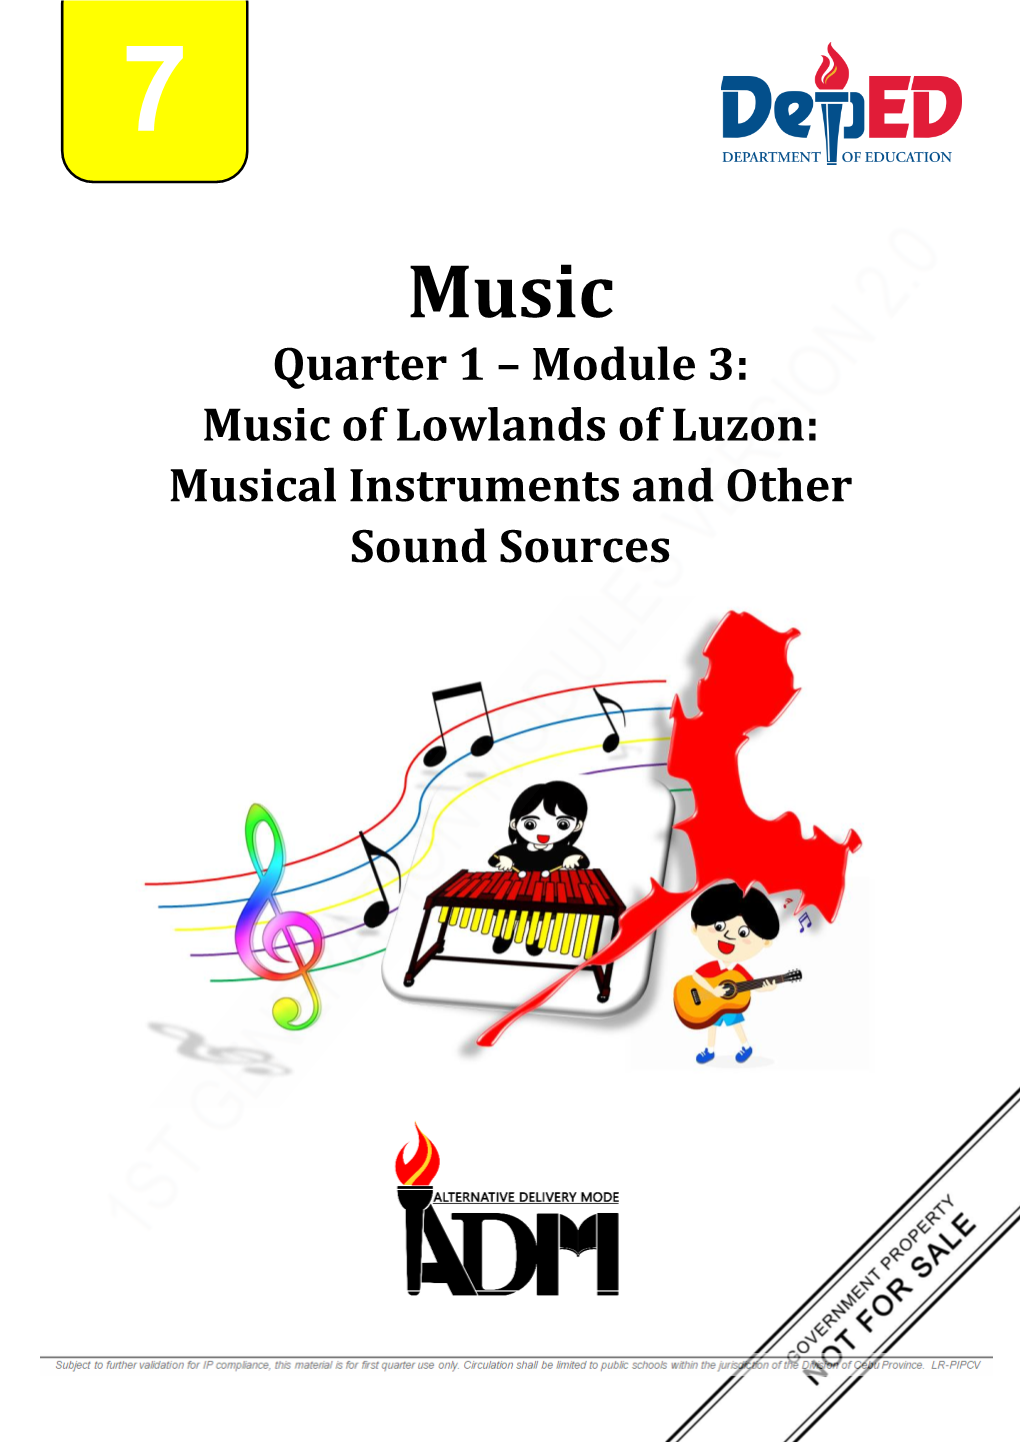 Quarter 1 – Module 3: Music of Lowlands of Luzon: Musical Instruments and Other Sound Sources